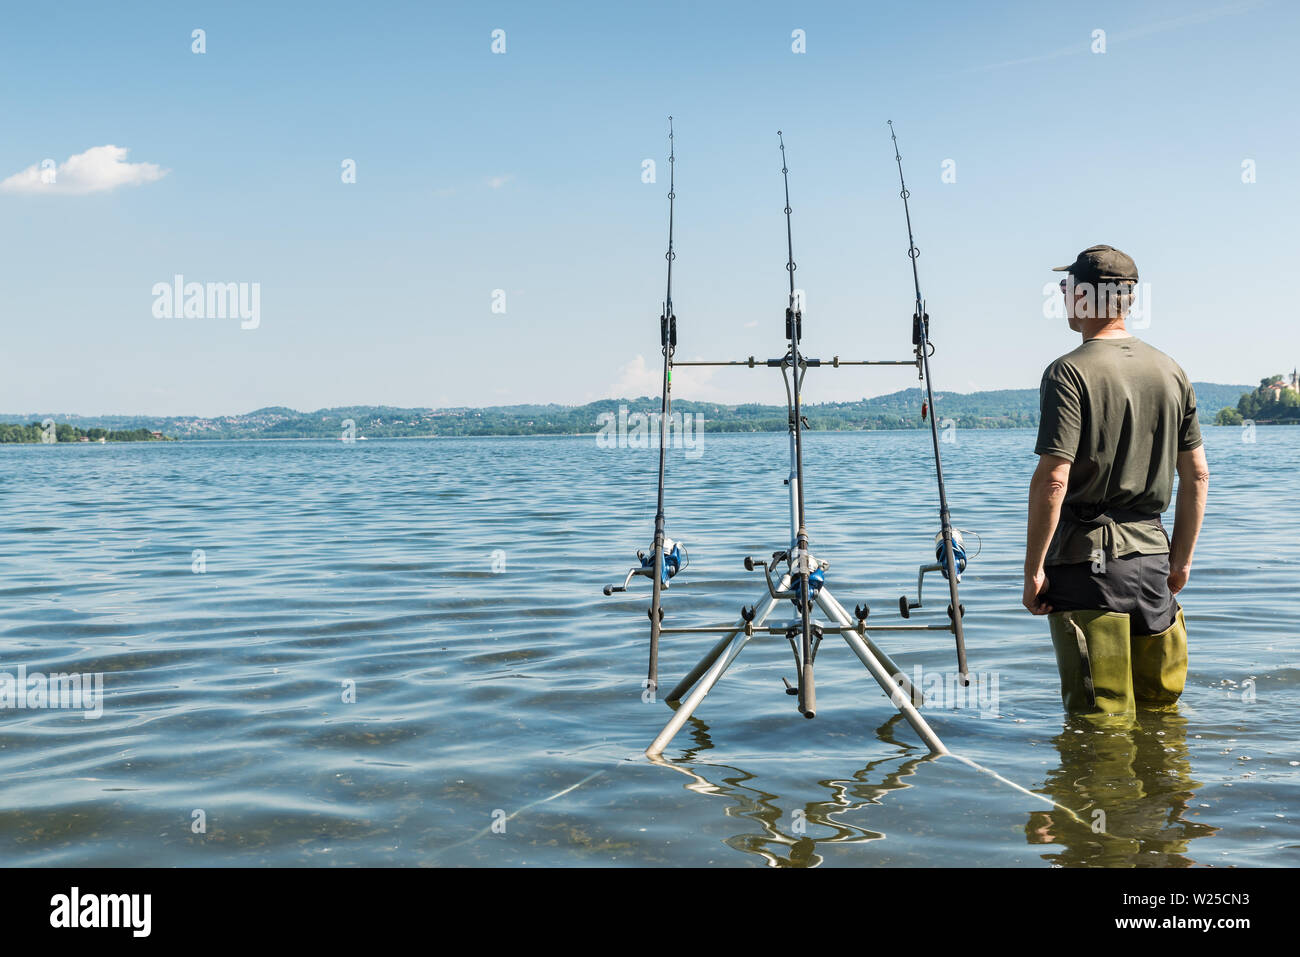 Fishing adventures, carp fishing. Fisherman with green rubber boots and camouflage clothing standing near the fishing gear. Copy space to the left Stock Photo